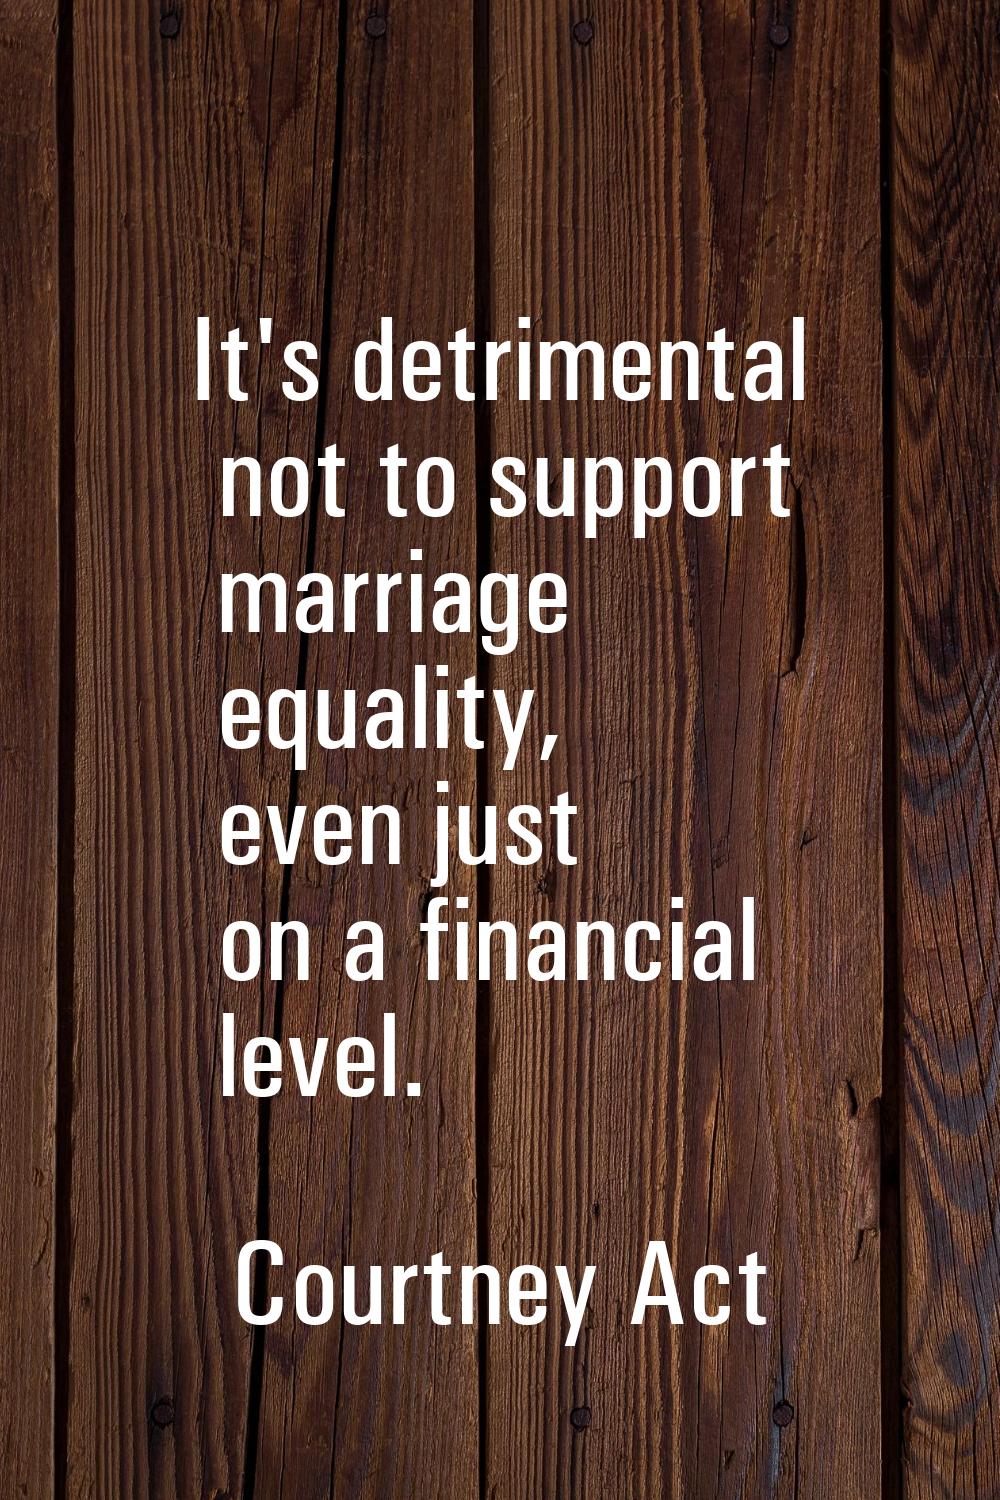 It's detrimental not to support marriage equality, even just on a financial level.